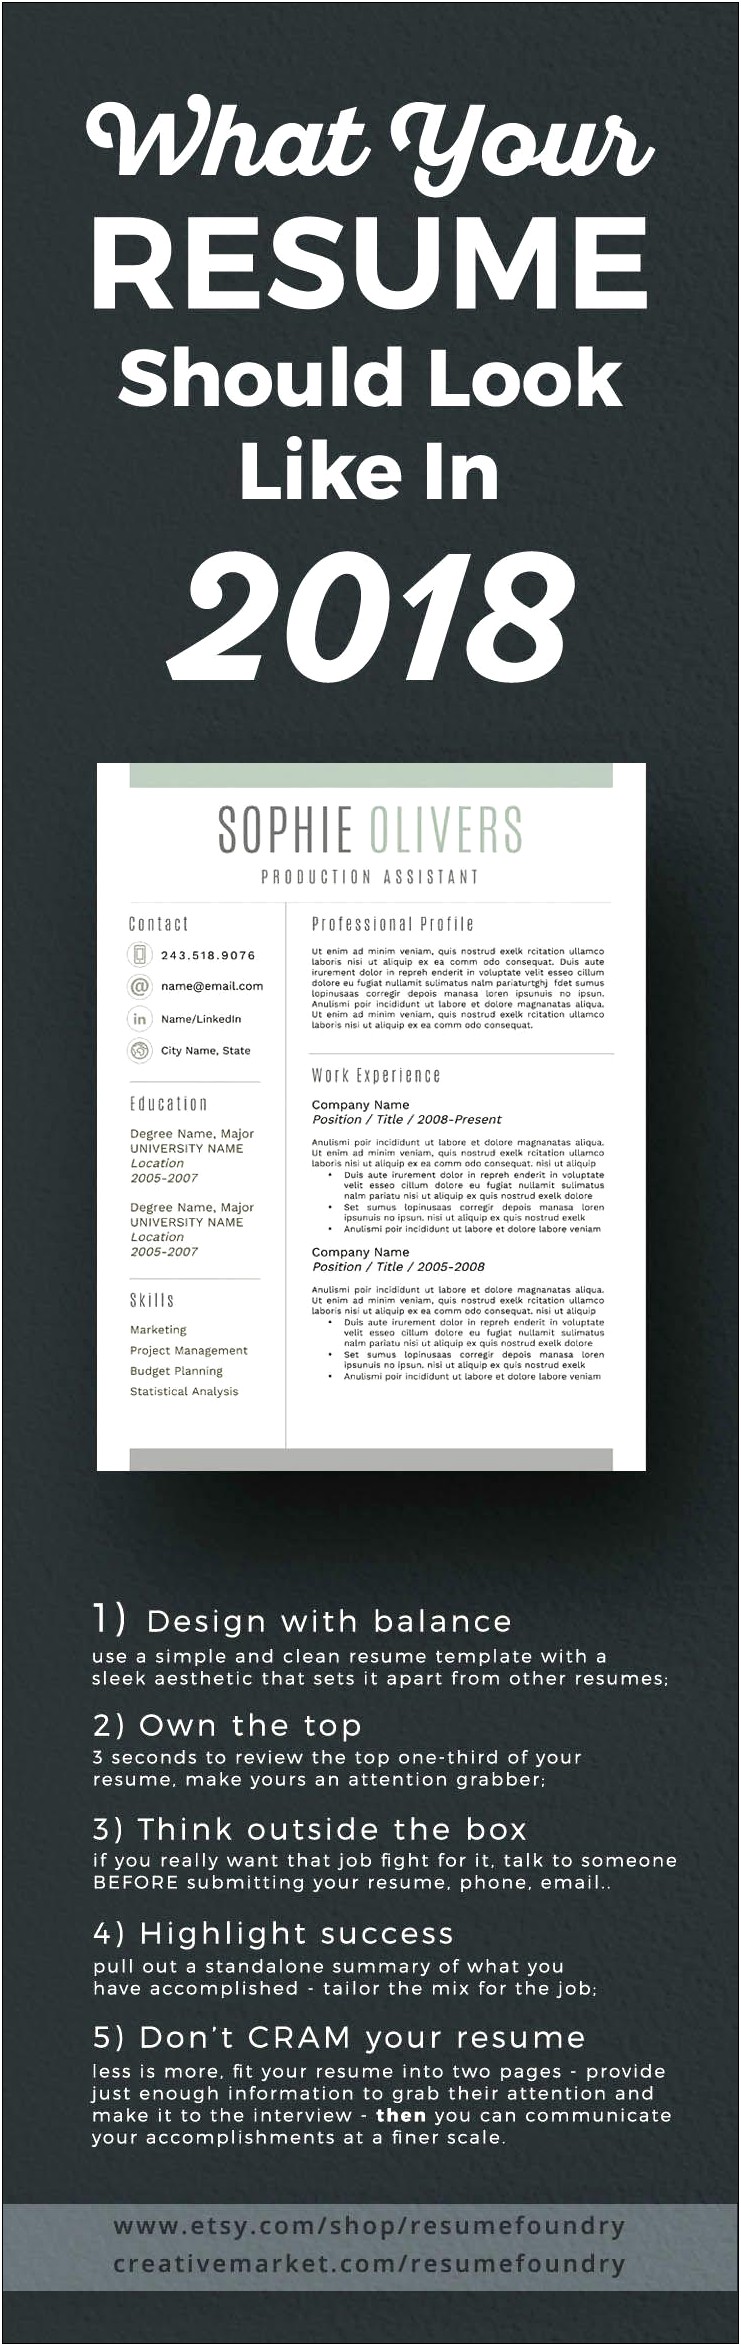 Do You Upper Case Job Title In Resume